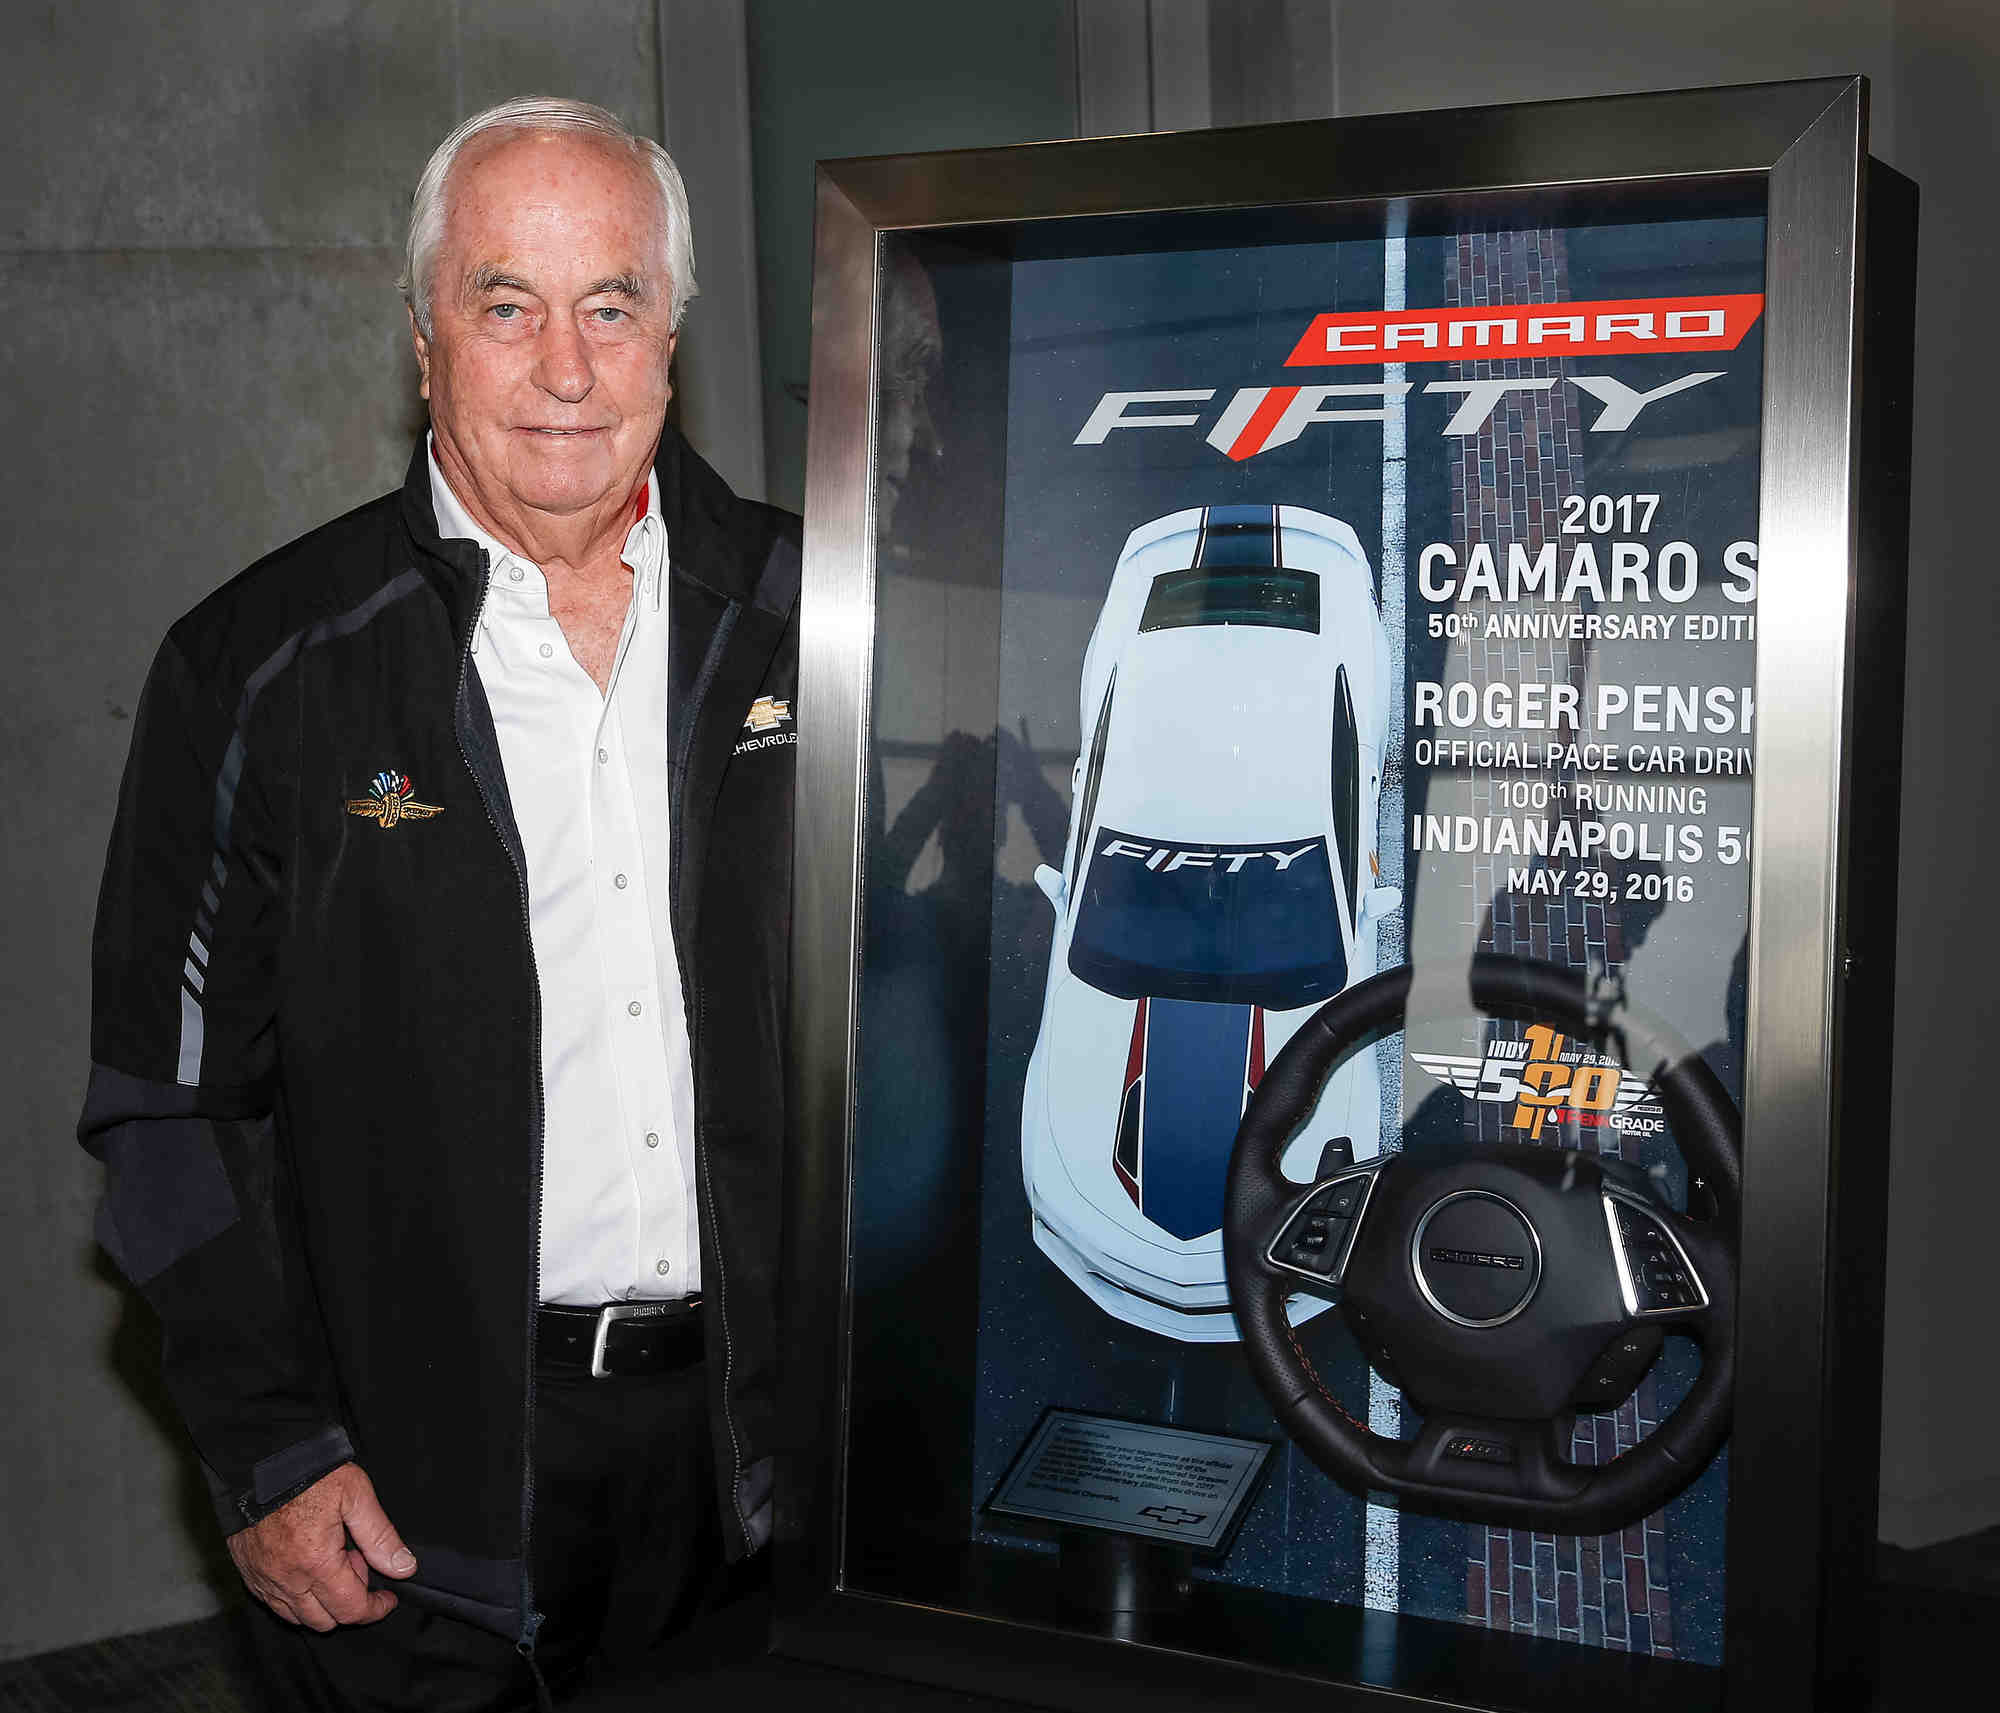 Chevrolet presents IndyCar team owner and racing legend Roger Penske with the 2017 Camaro SS 50th Anniversary Edition pace car steering wheel in celebration of his 50 years as a race team owner Friday, May 13, 2016 at the Indianapolis Motor Speedway in Indianapolis, Indiana. Penske will drive the Camaro SS pace car to lead the field for the 100th running of the Indianapolis 500 on May 29.